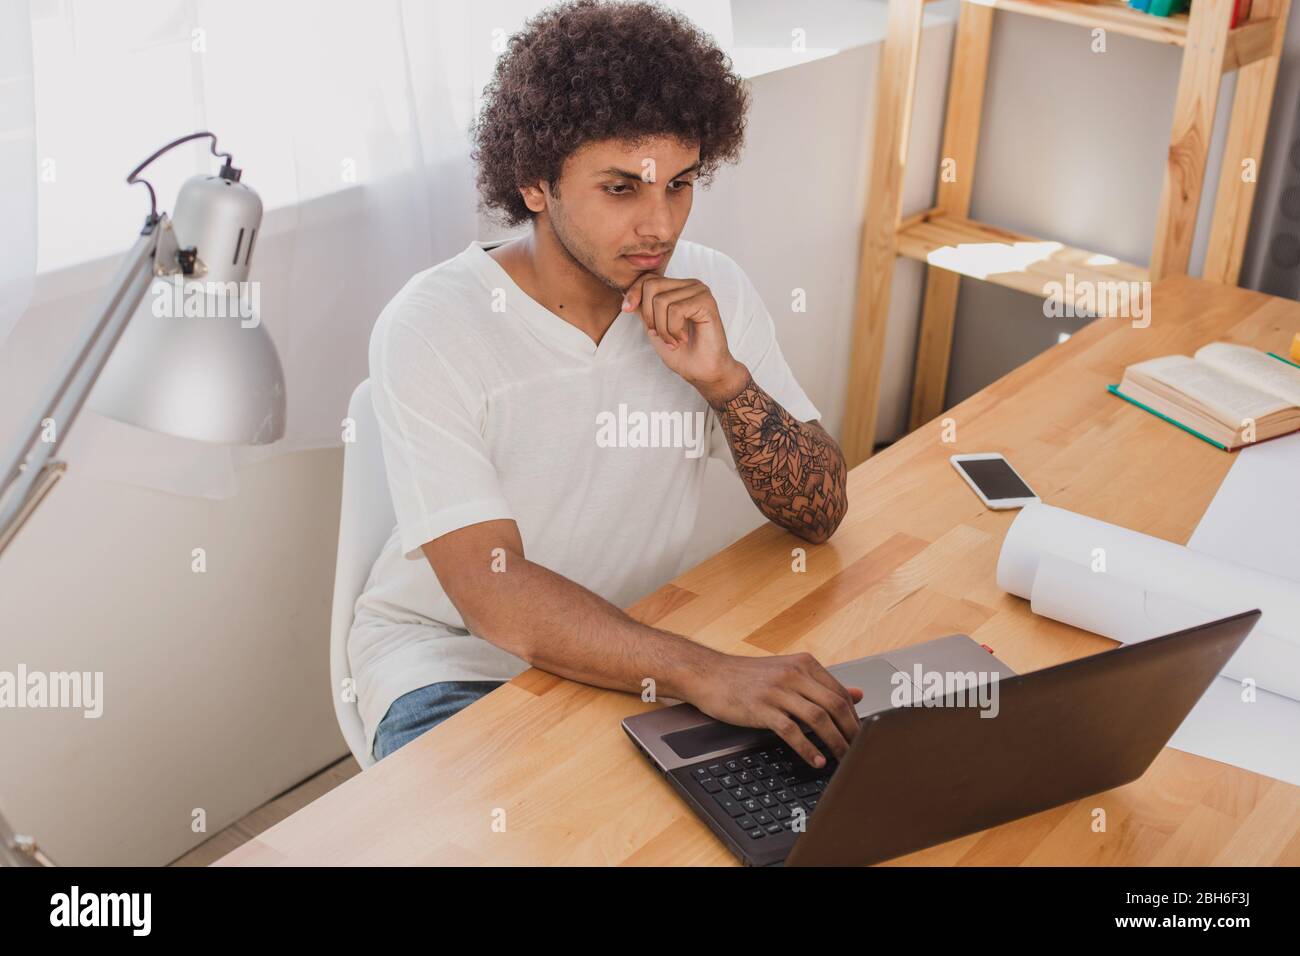 Work at home on laptop. Attractive man arabian nationality concentrated looking at the laptop and thinking. Stock Photo